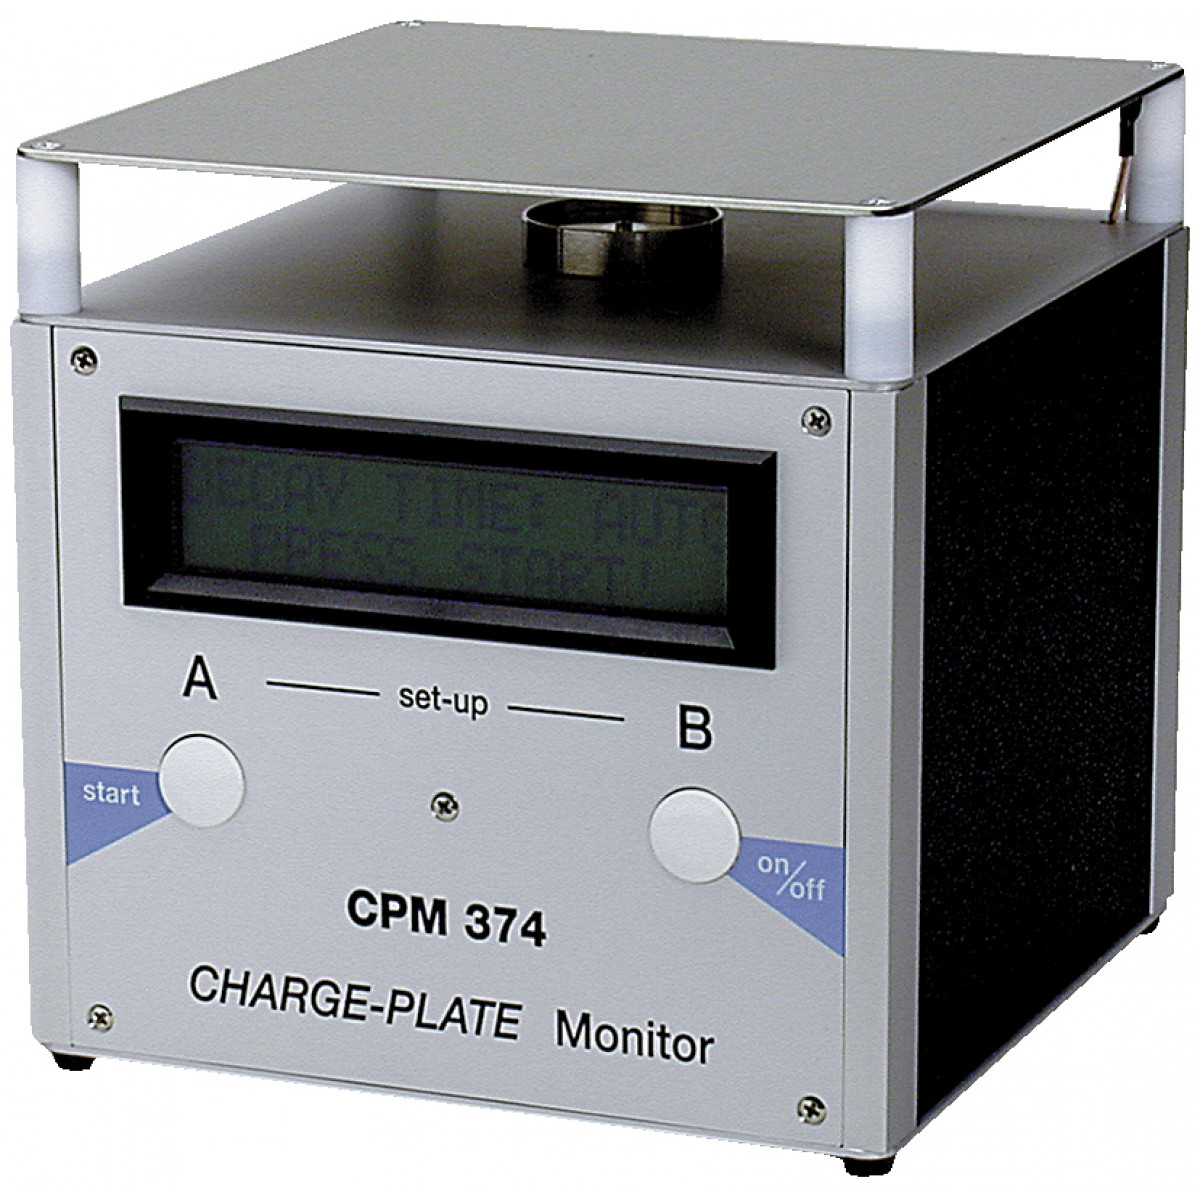 CPM 374 - Charge Plate Monitor